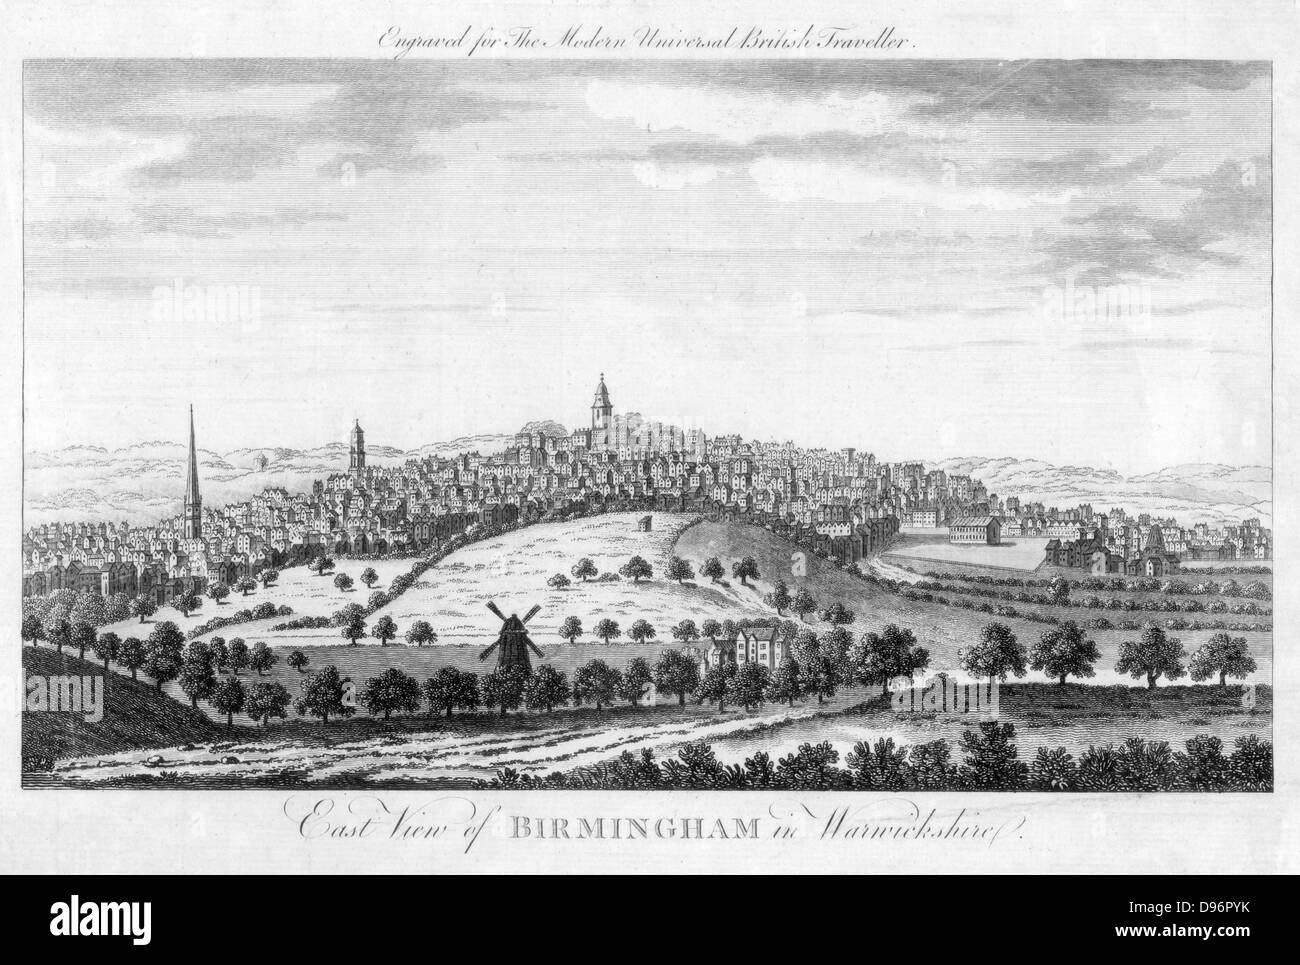 East View of Birmingham in Warwickshire'.  From 'The Modern Universal British Traveller'. (London, 1779). Copperplate engraving. Stock Photo